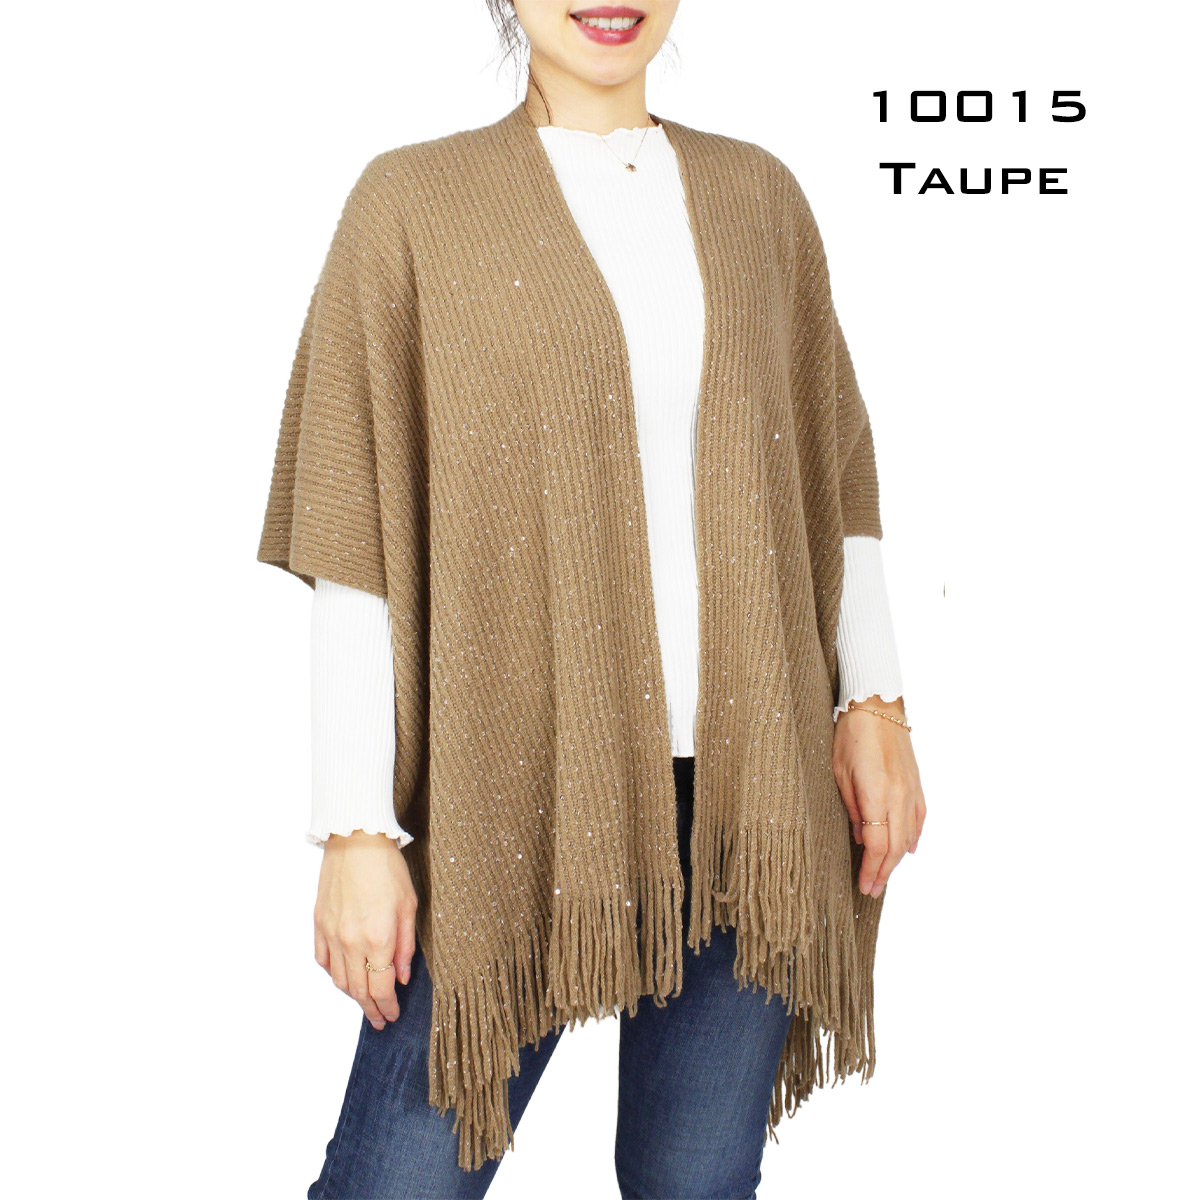 10015 TAUPE Sequined Knit Ruana 